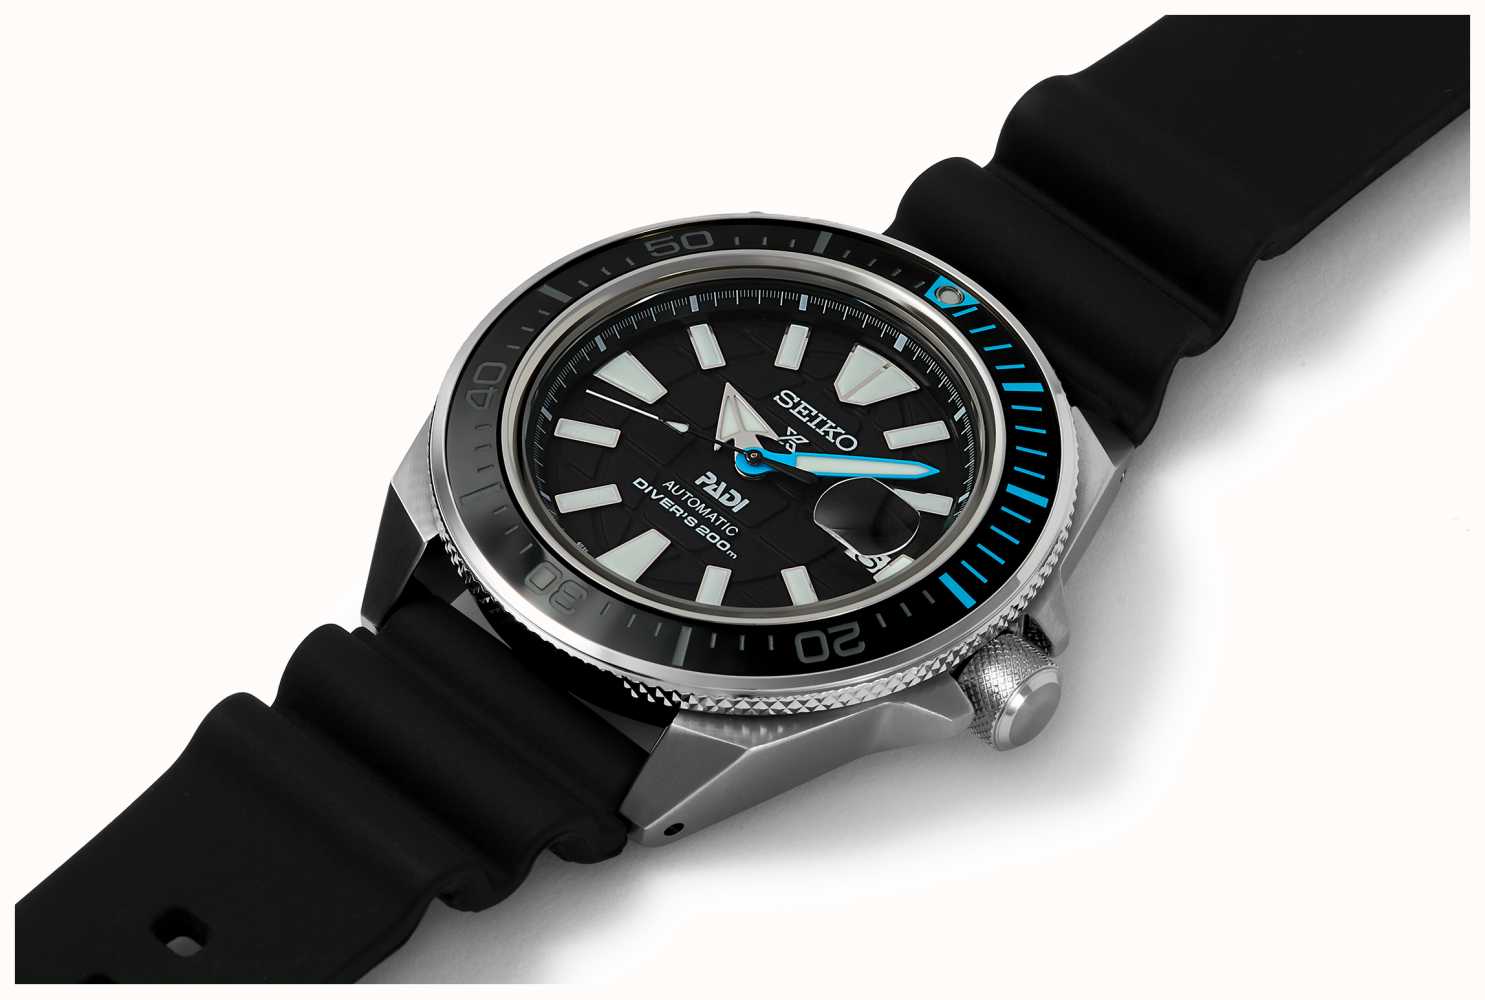 Watches for sale online - Seiko Prospex Padi Special Edition 'King Samurai' Automatic Diver's